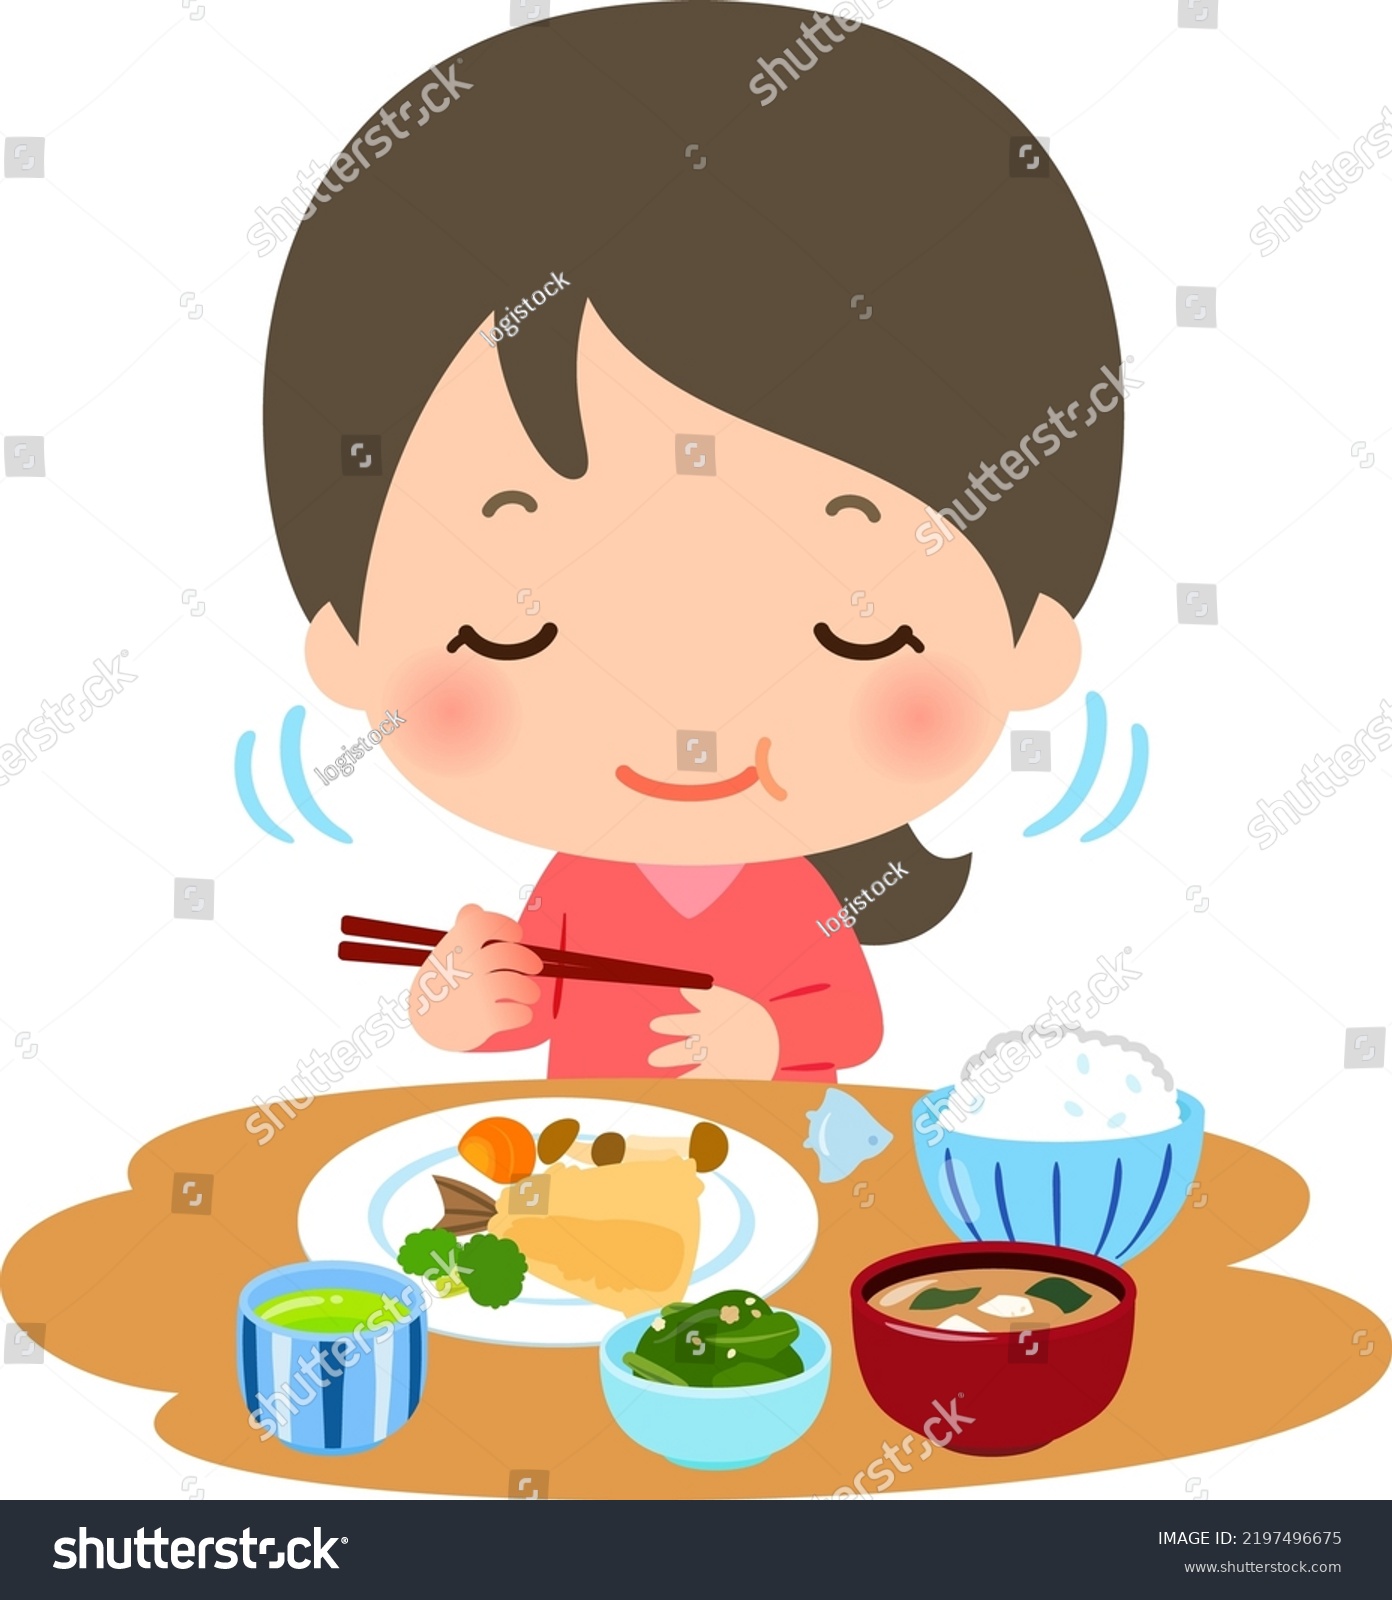 SVG of A woman who chews and eats well svg